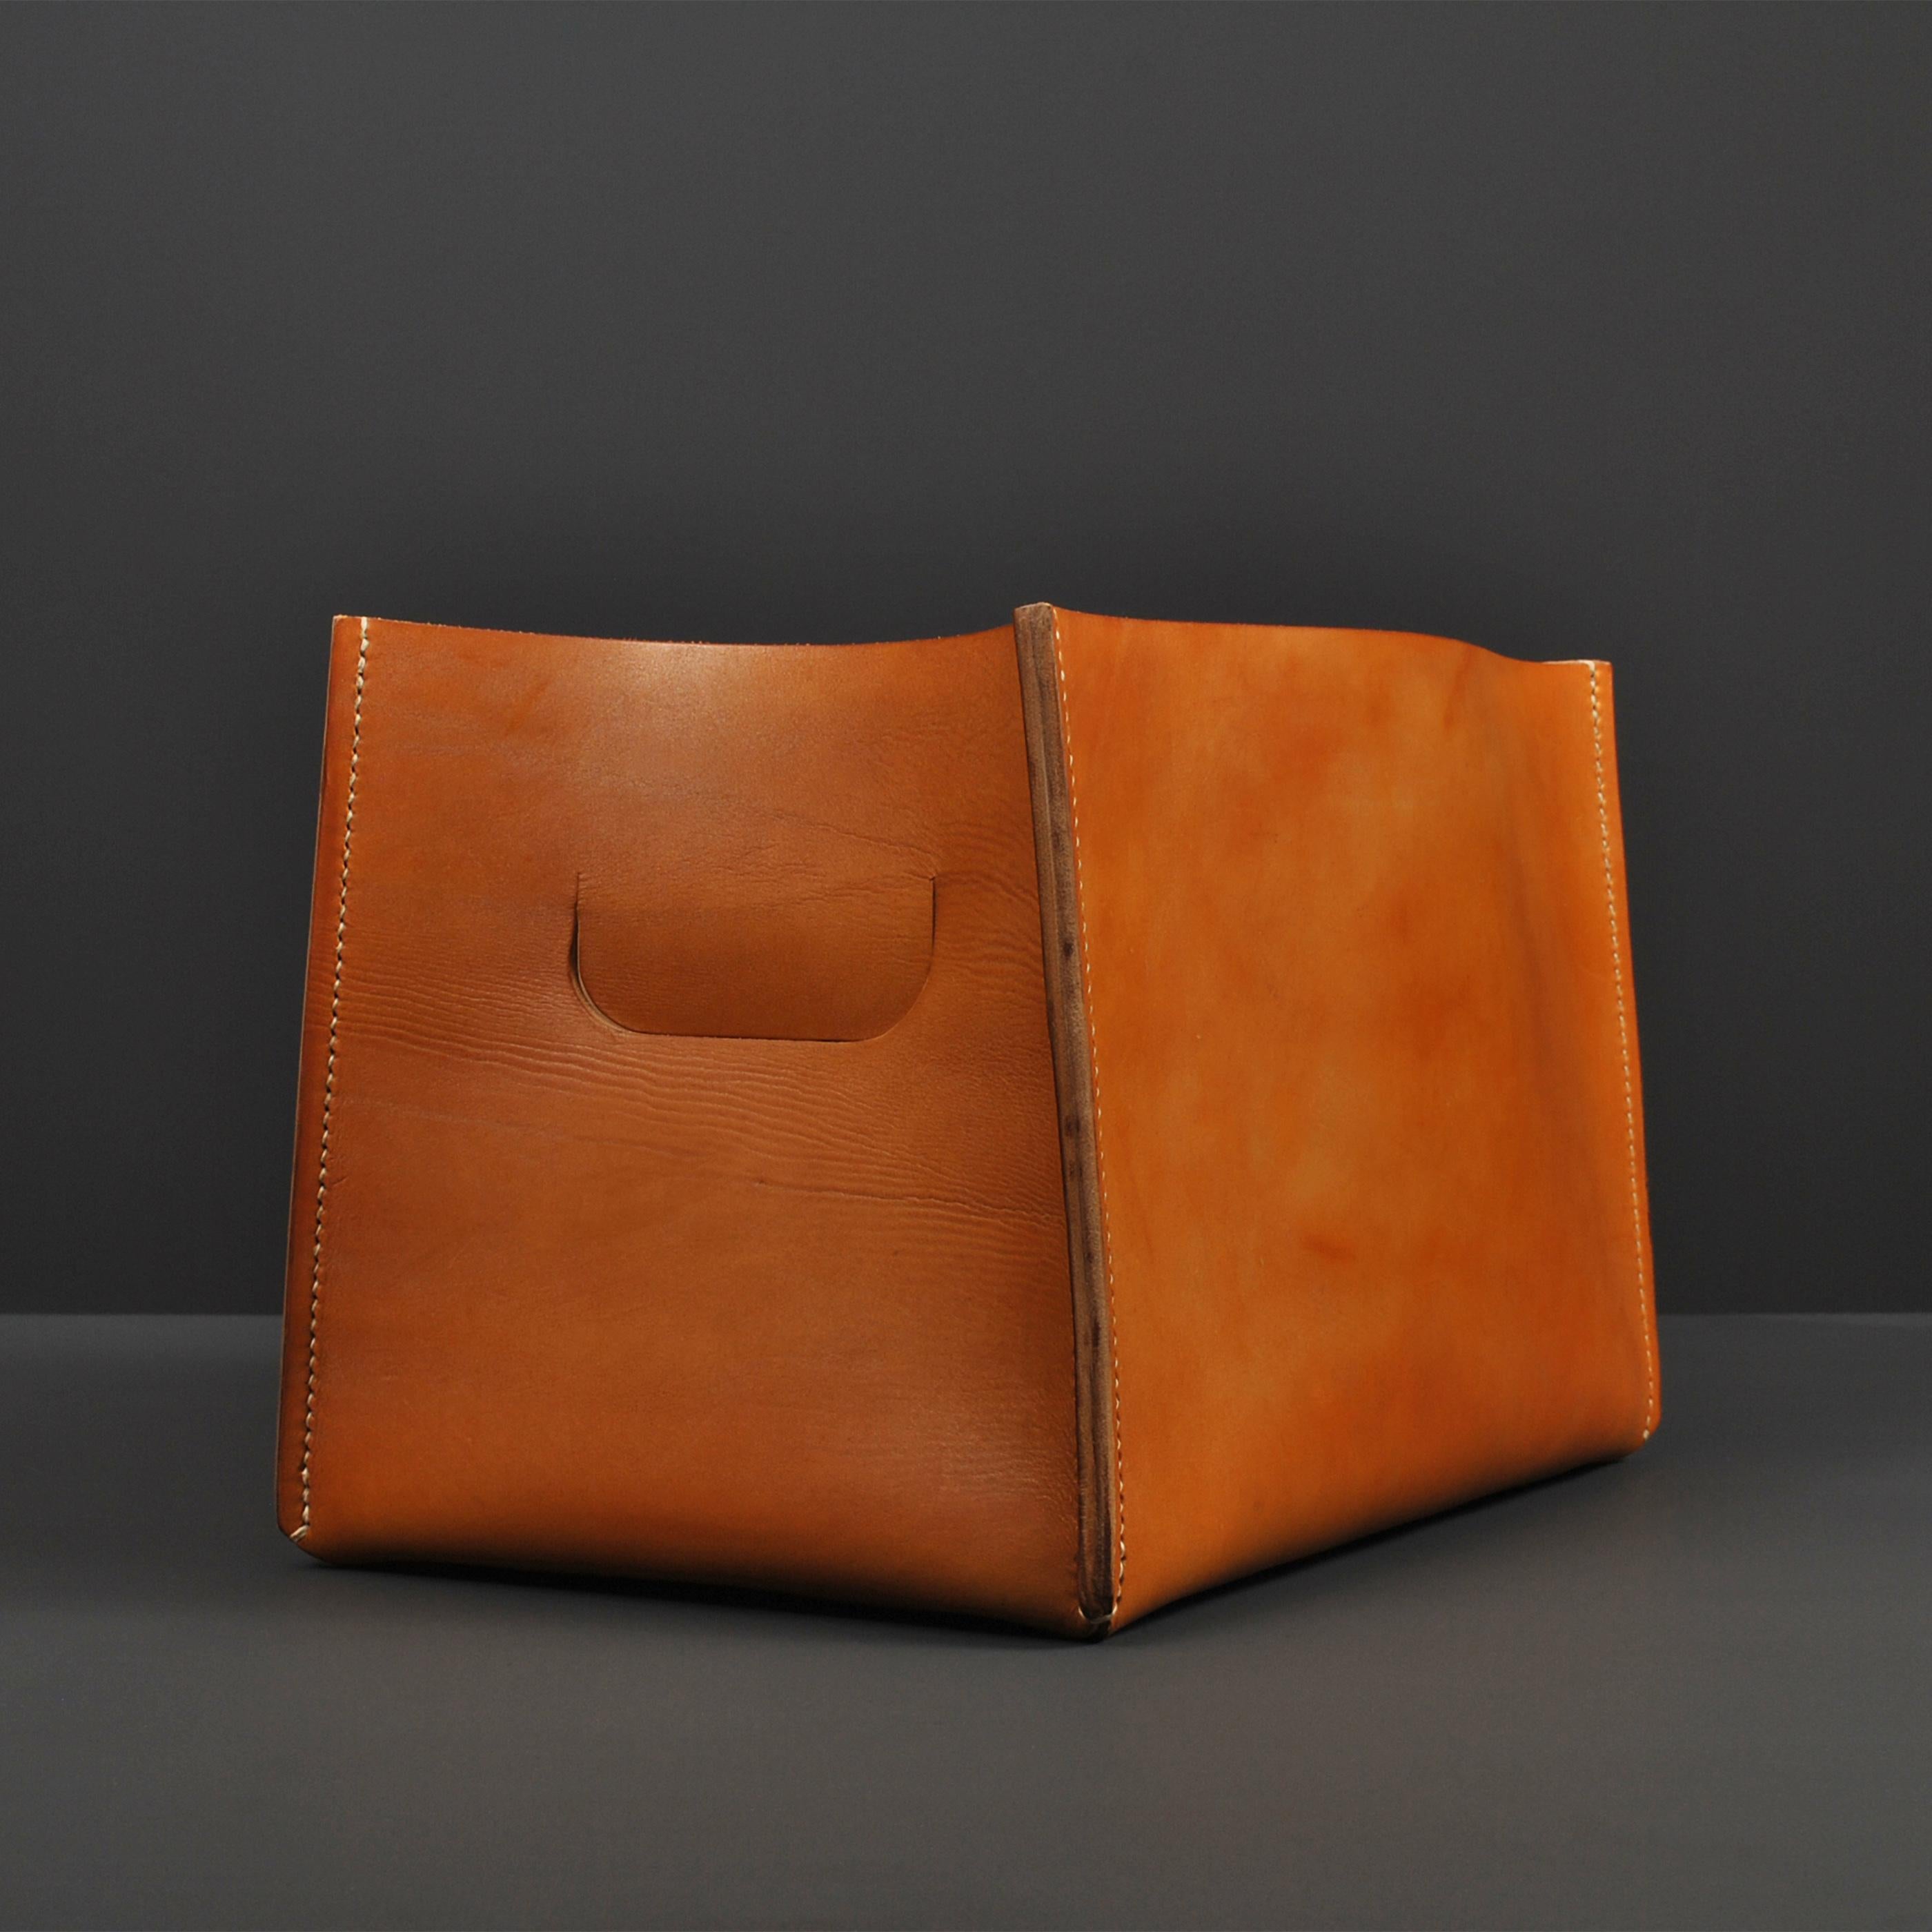 Contemporary Hand-Crafted Leather & Oak Box